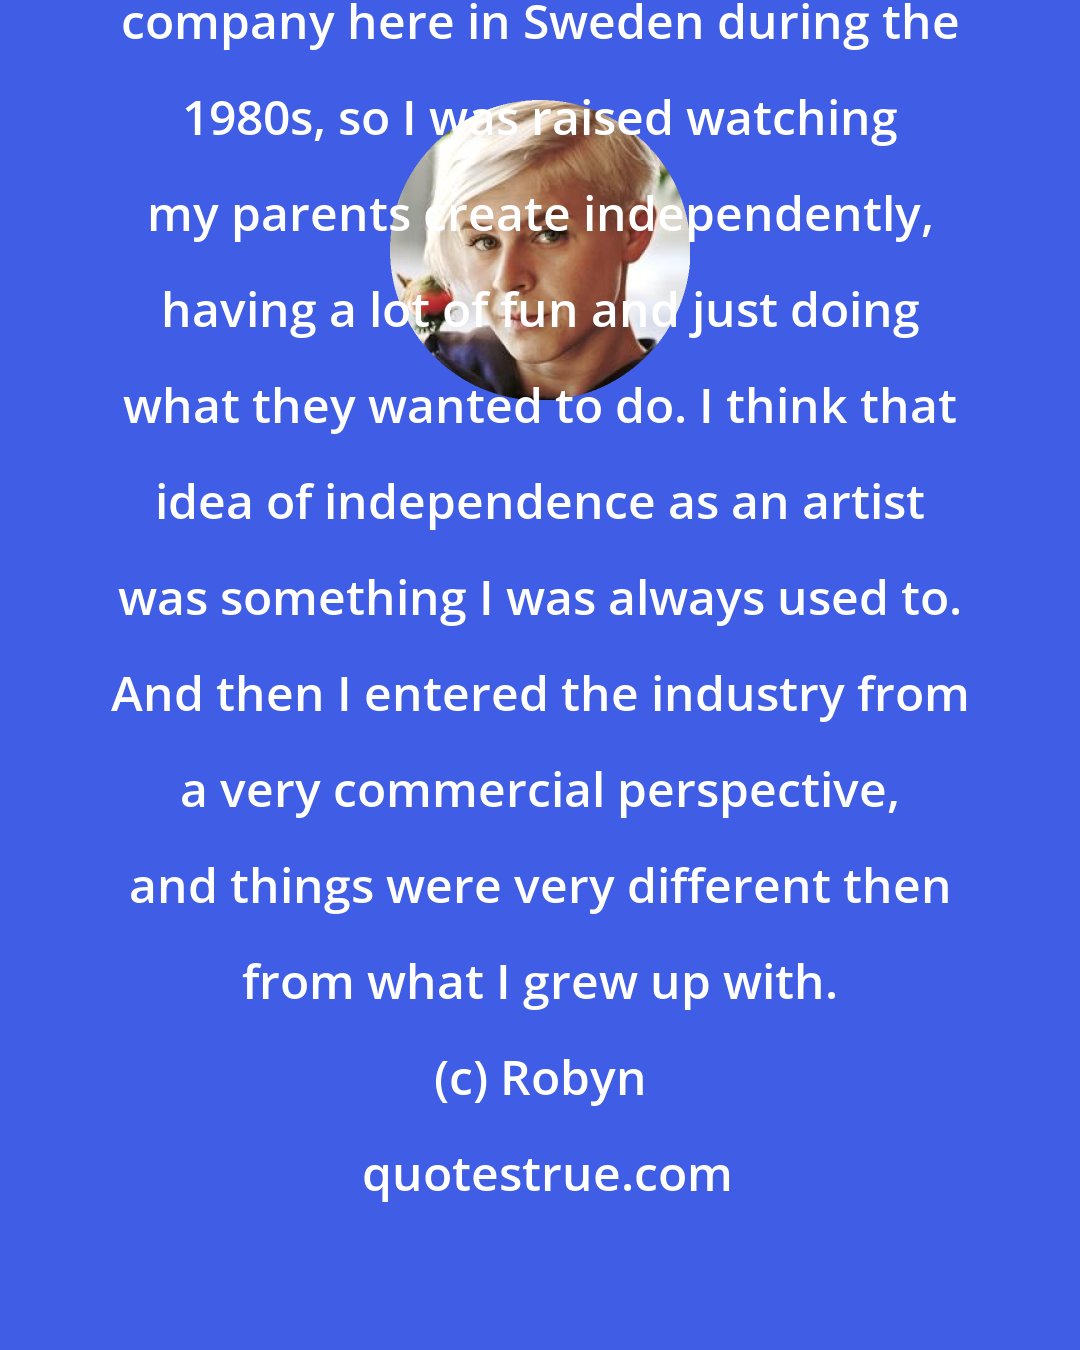 Robyn: My parents had an independent theater company here in Sweden during the 1980s, so I was raised watching my parents create independently, having a lot of fun and just doing what they wanted to do. I think that idea of independence as an artist was something I was always used to. And then I entered the industry from a very commercial perspective, and things were very different then from what I grew up with.